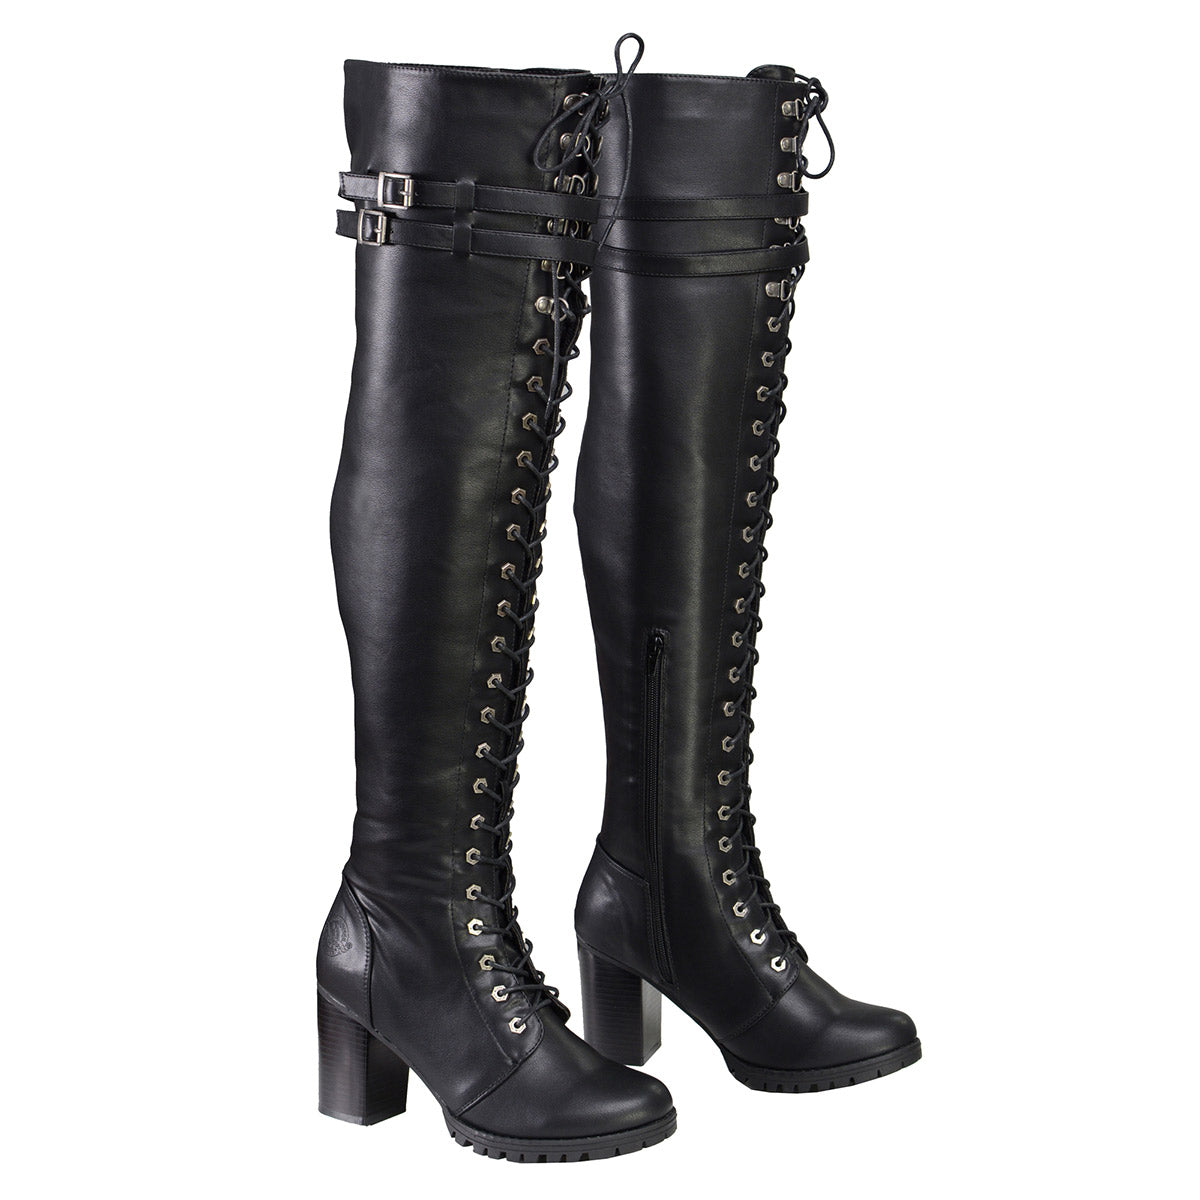 Milwaukee Performance MBL9424 Women's Black Above the Knee Boots with Lace-Up Closure